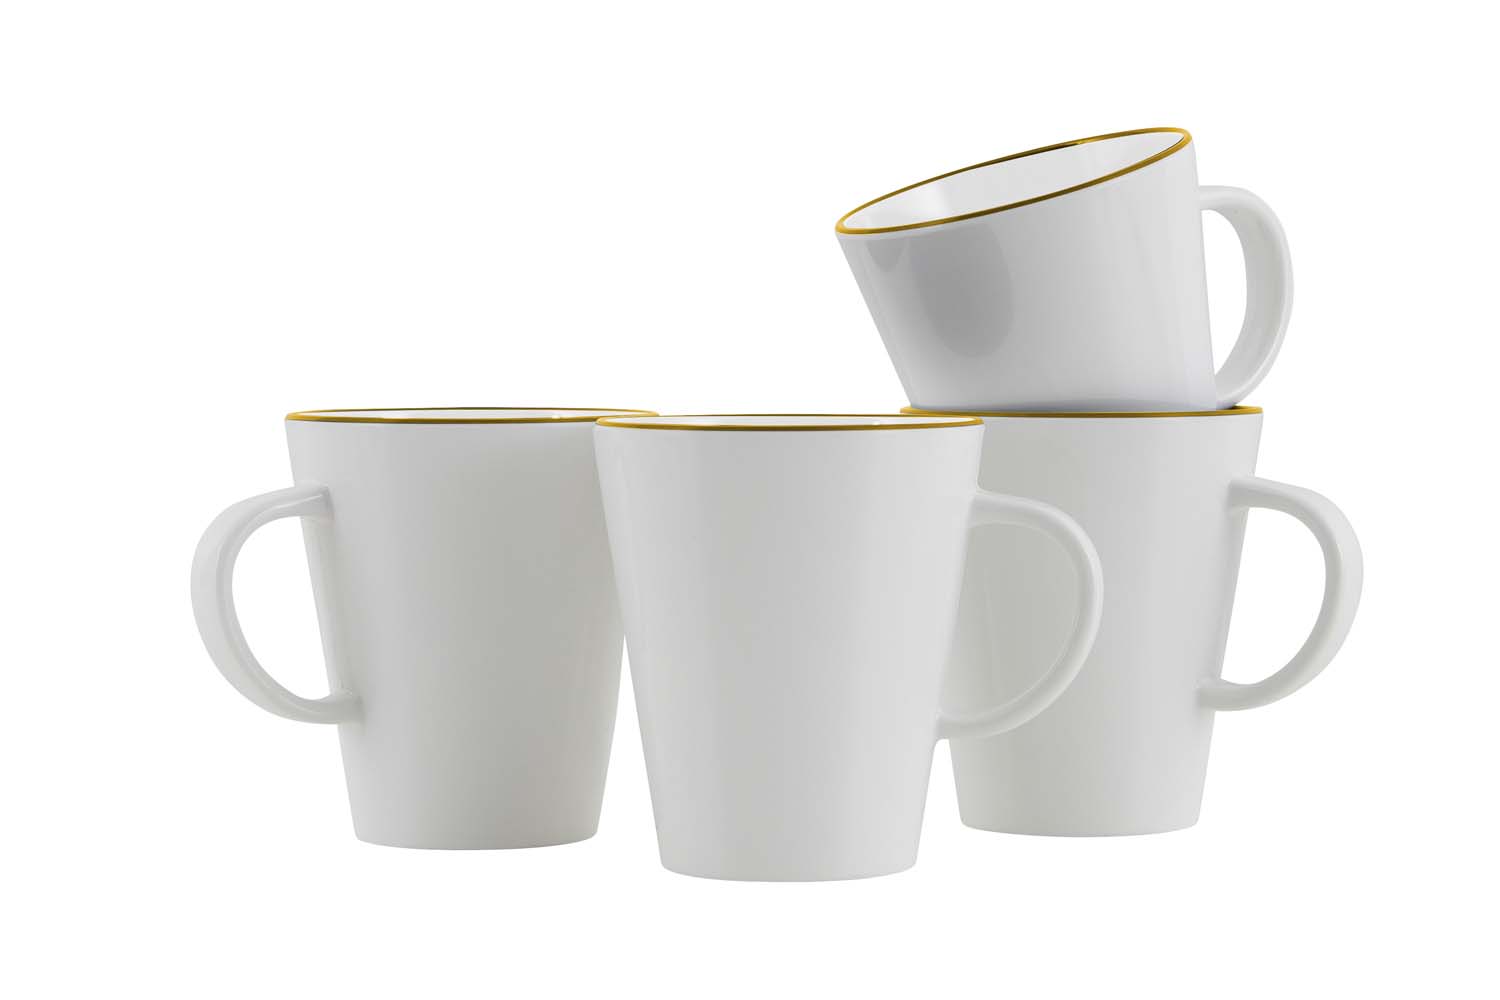 6915122 A stylish mug with a gold detail from the Linea line collection. 100% high quality melamine, virtually unbreakable and scratch resistant. Consists of a set of 4 pieces. The mug is soundproof and hygienic due to the replaceable non-slip solution. Moreover, the mug is lightweight, dishwasher safe and food approved. Capacity: 350 ml.